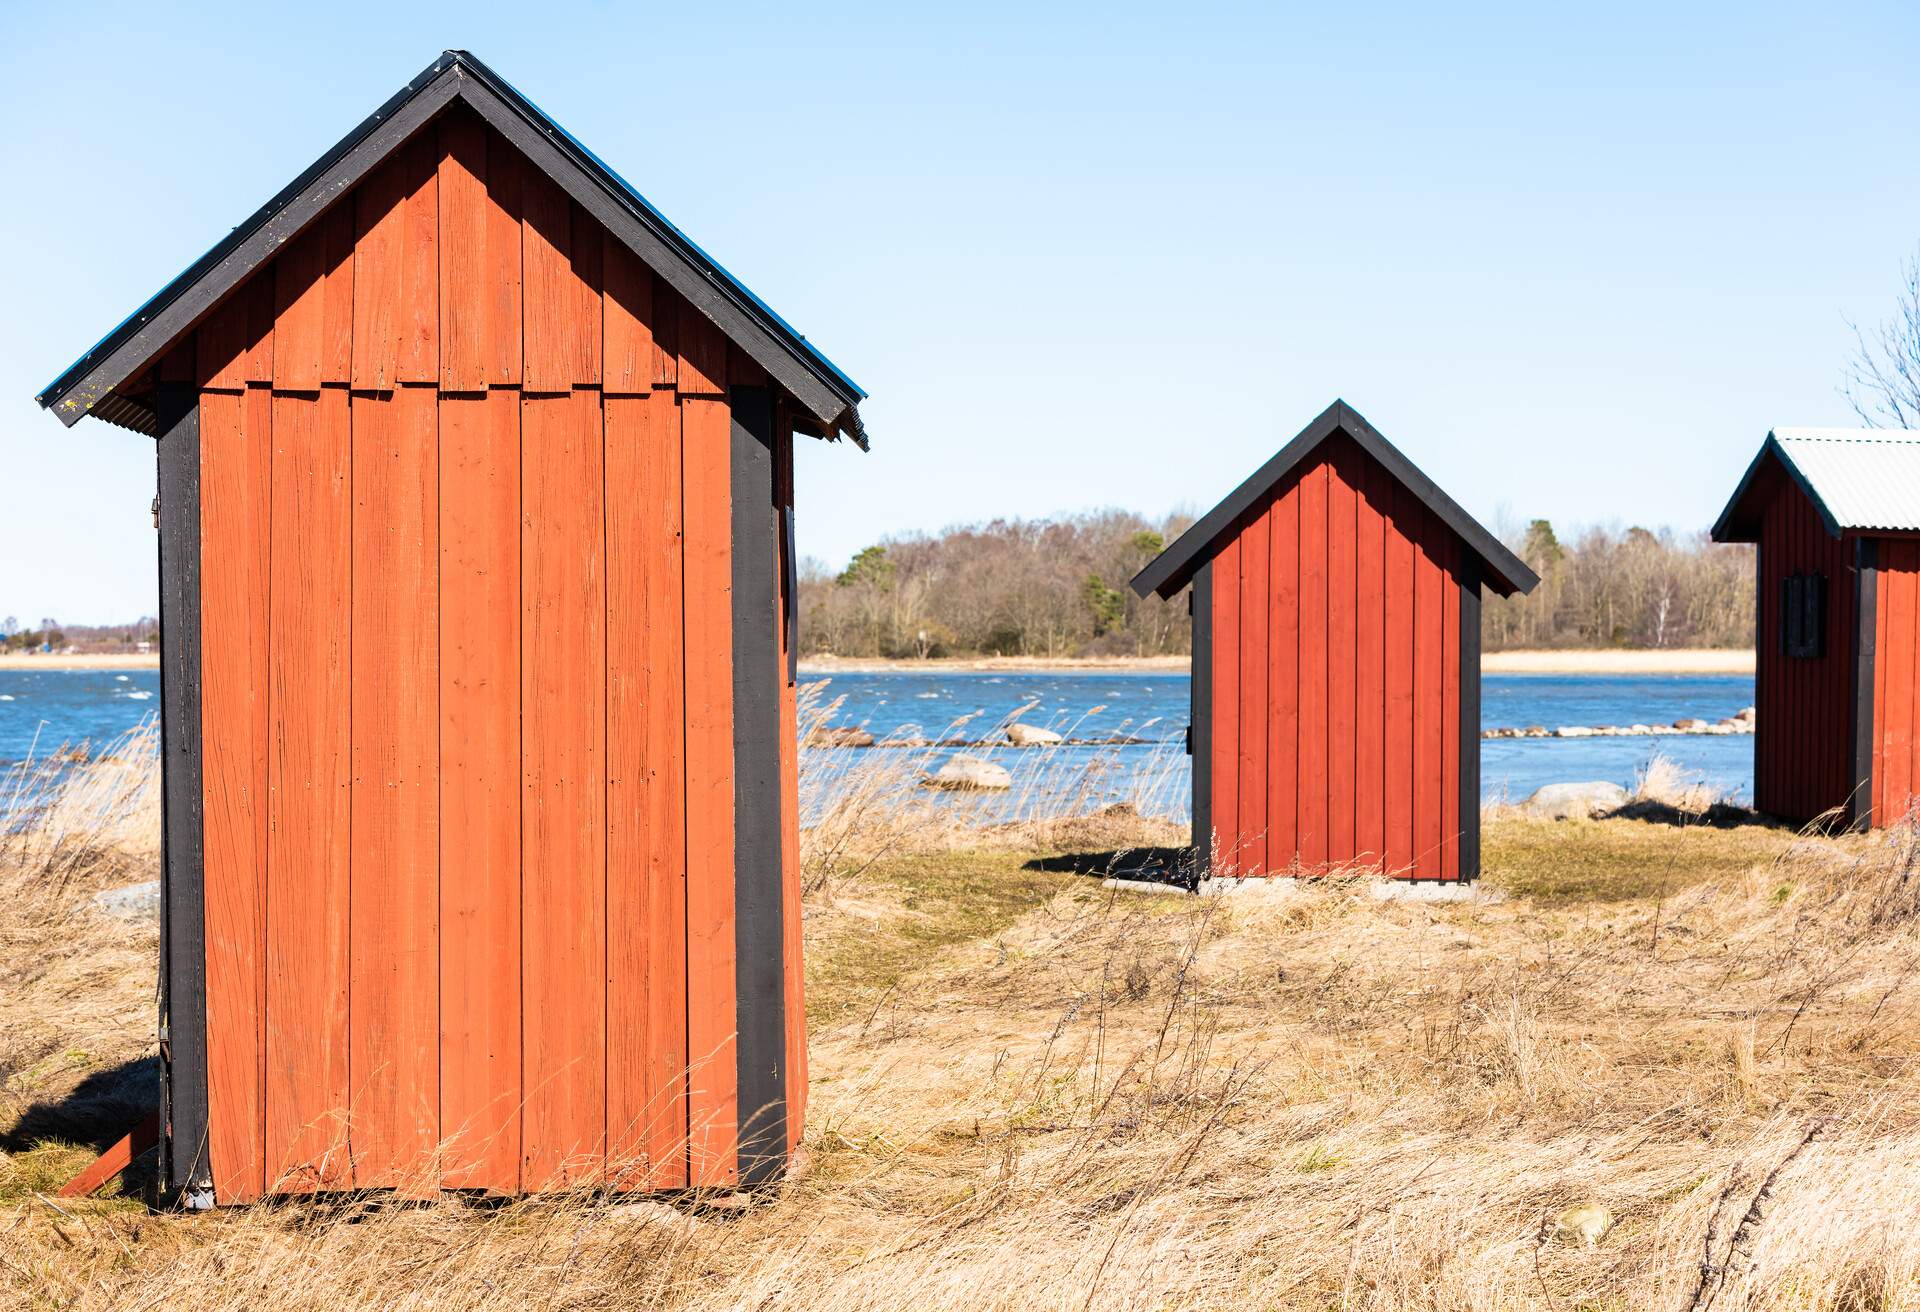 Small fishing sheds in coastal landscape on a sunny and windy day. Location Farjestaden, on the island of Oland, Sweden.